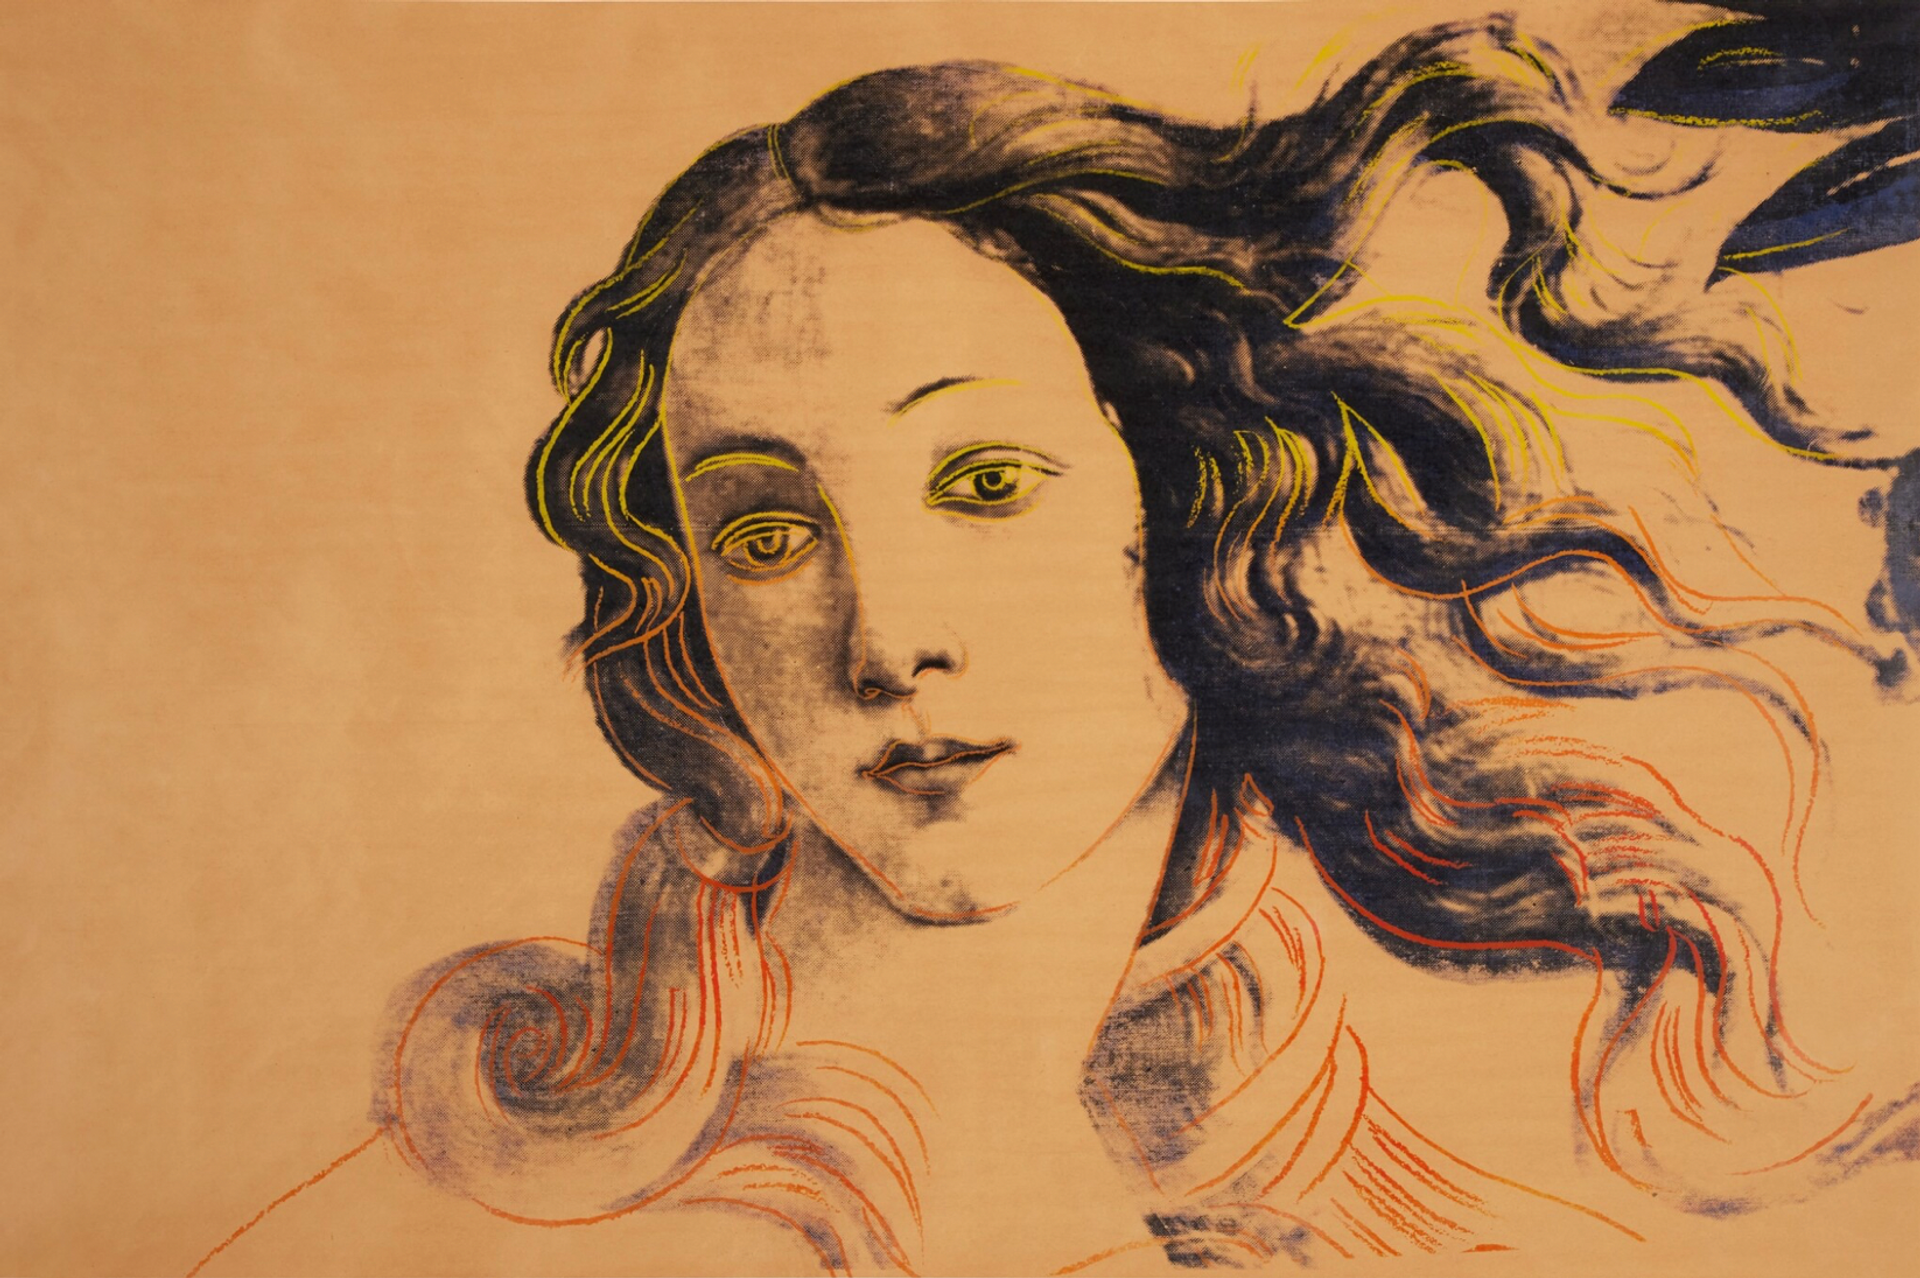 A large-scale artwork by Andy Warhol showcasing a cropped image of Bottecilli’s venus from The Birth of Venus. The artwork features a beige colour palette with hints of green and orange highlighting Venu’s flowing hair.